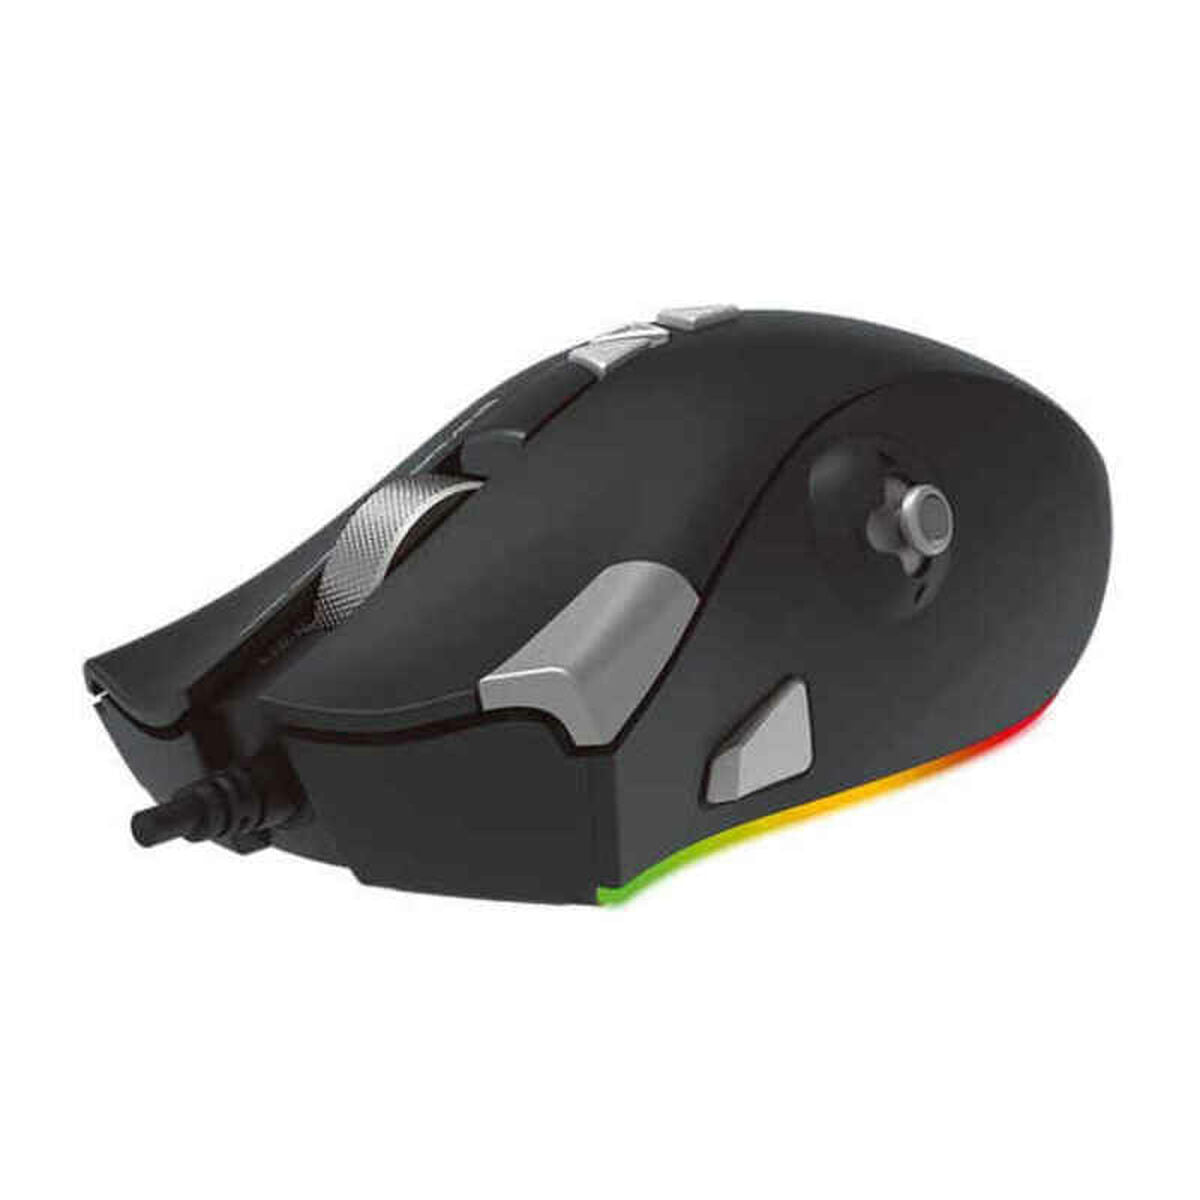 Gaming Mouse Scorpion MA-G960 Black, Scorpion, Computing, Accessories, gaming-mouse-scorpion-ma-g960-black, Brand_Scorpion, category-reference-2609, category-reference-2642, category-reference-2656, category-reference-t-19685, category-reference-t-19908, category-reference-t-21348, computers / peripherals, Condition_NEW, office, Price_50 - 100, Teleworking, RiotNook